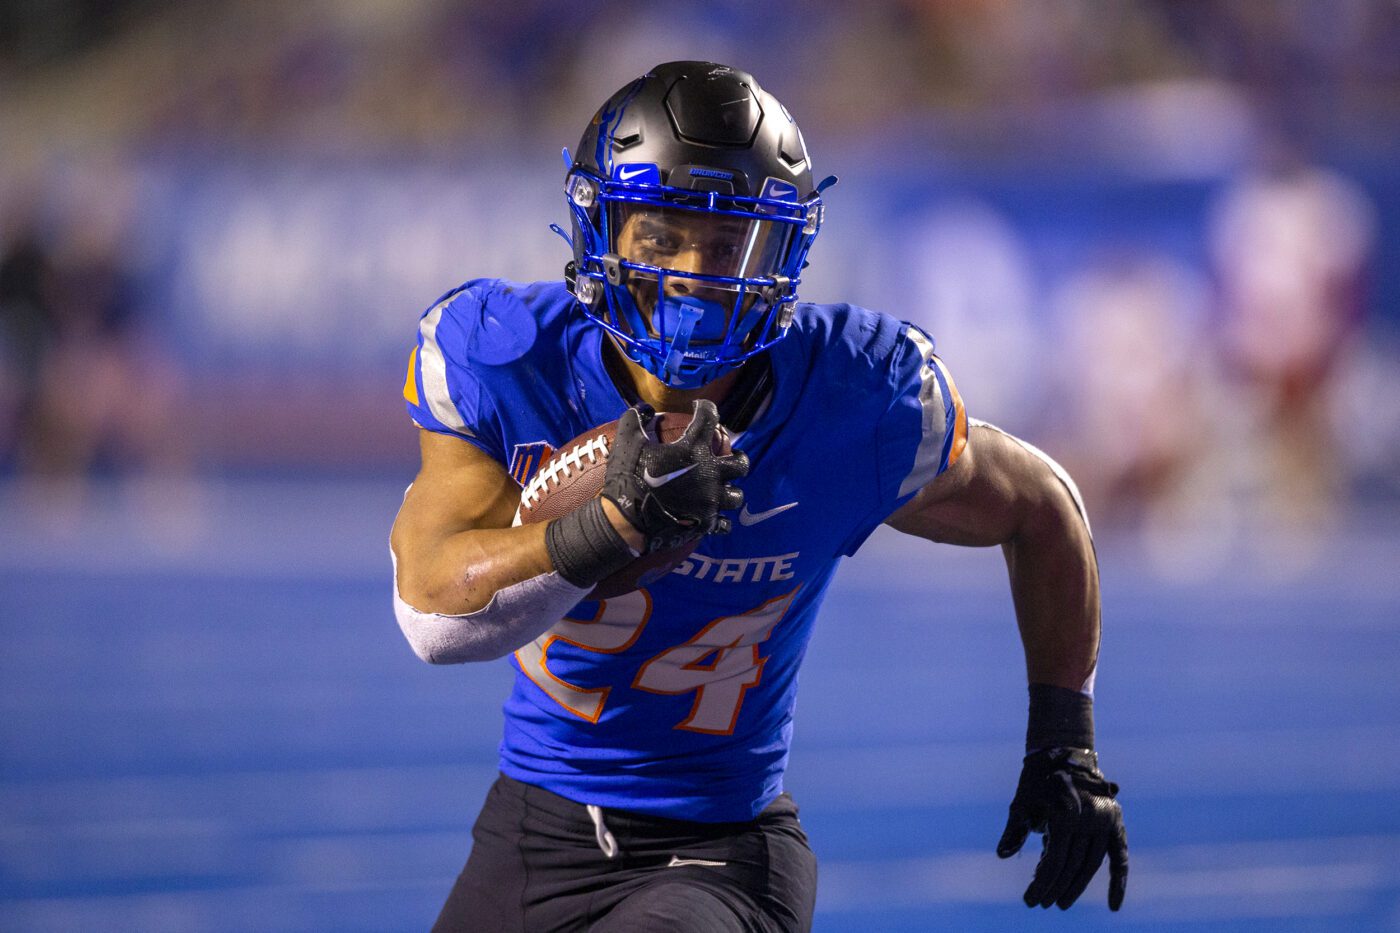 MWC: Boise State vs Colorado State 10/29/22 College Football Picks, Predictions, Odds